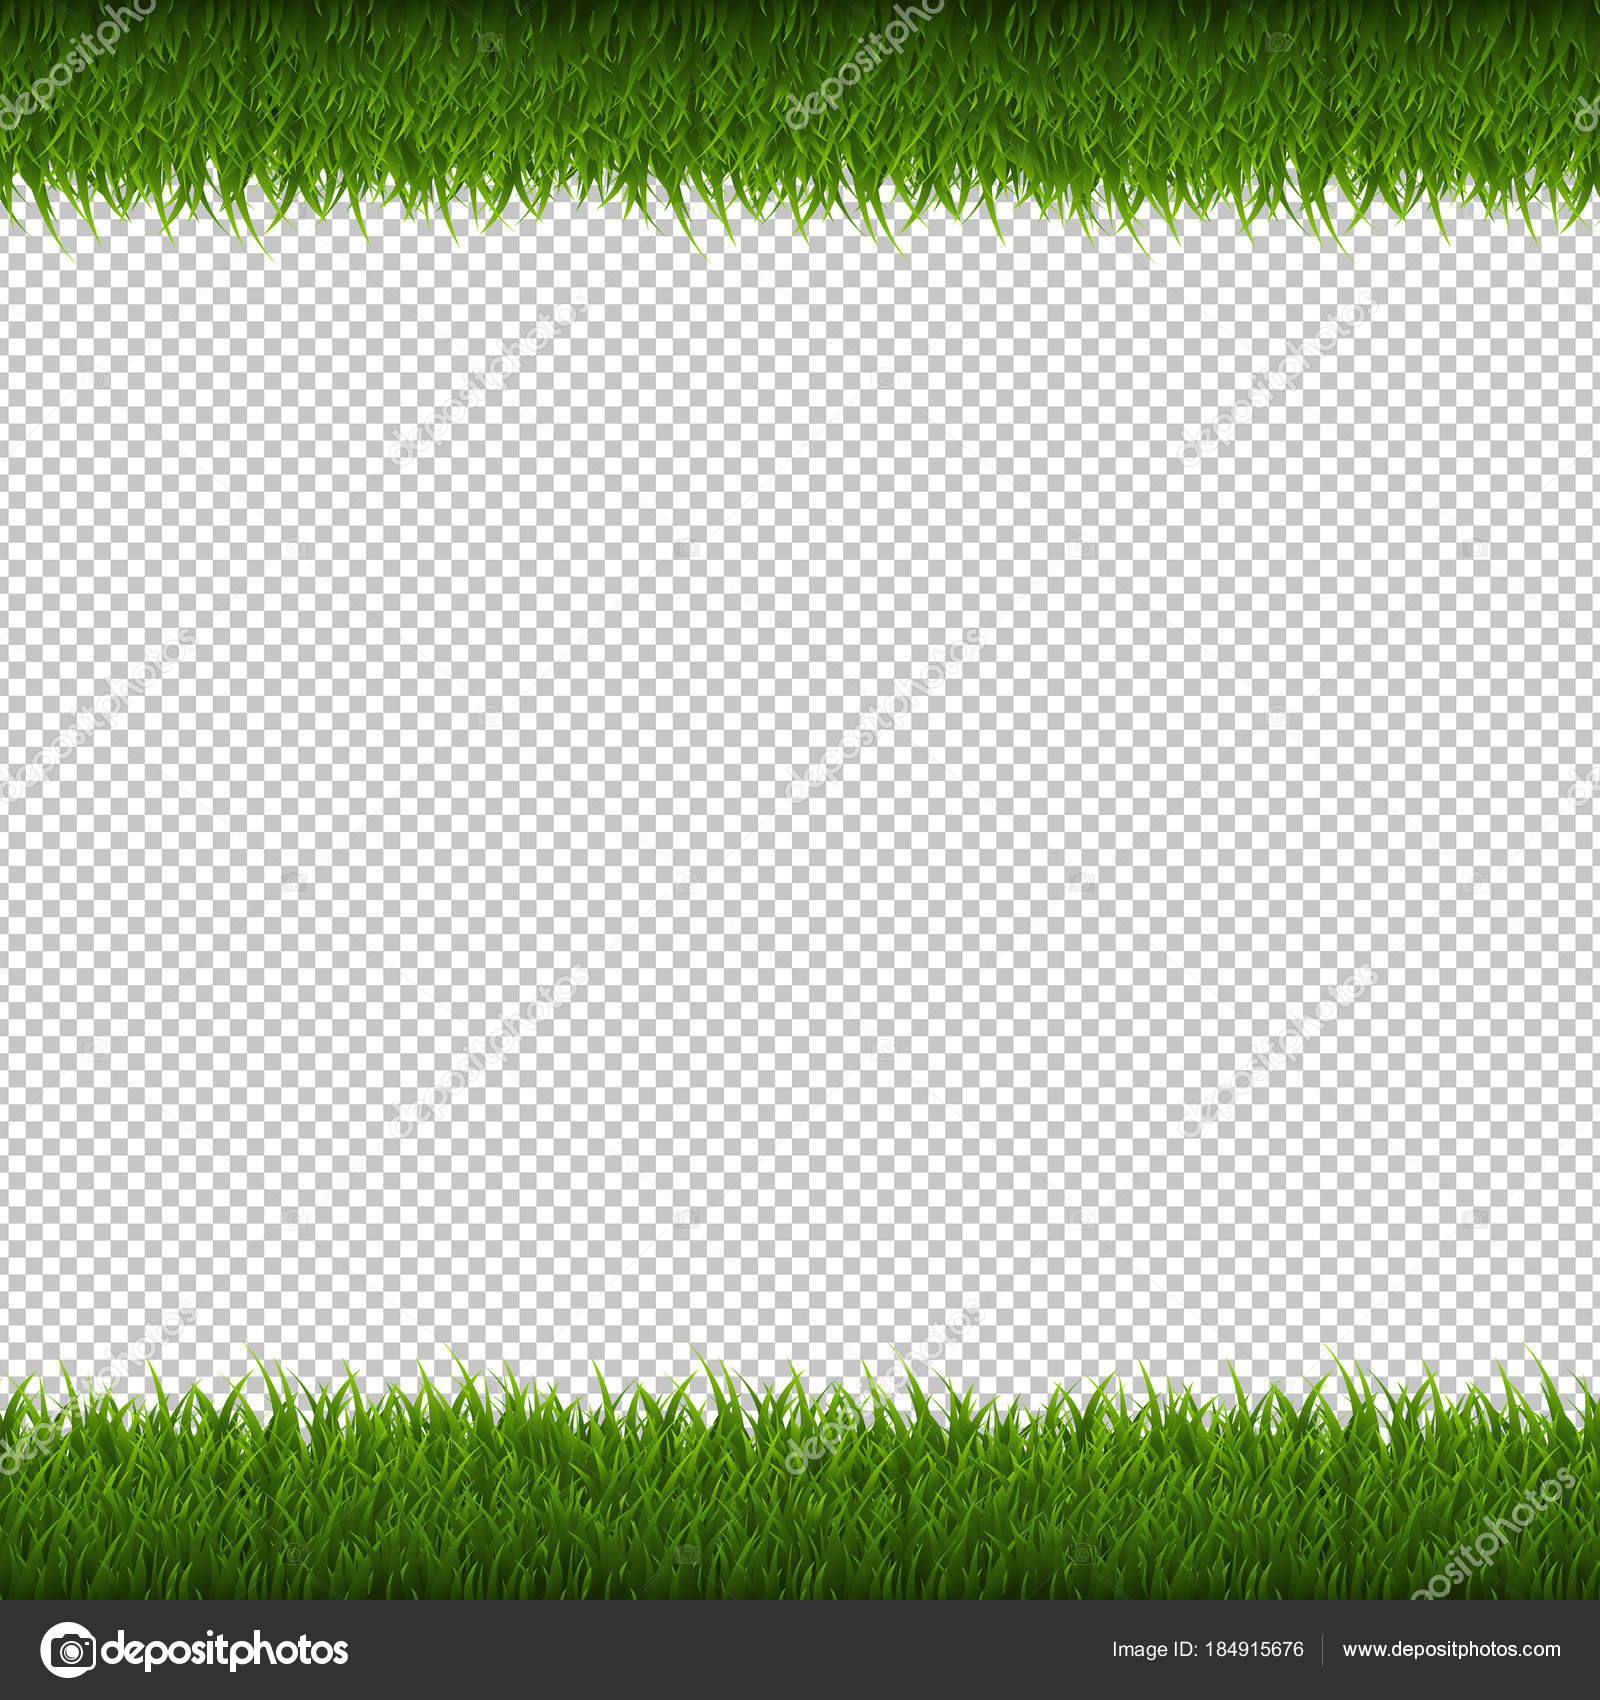 Green Grass Border Isolated Transparent Background Vector ...